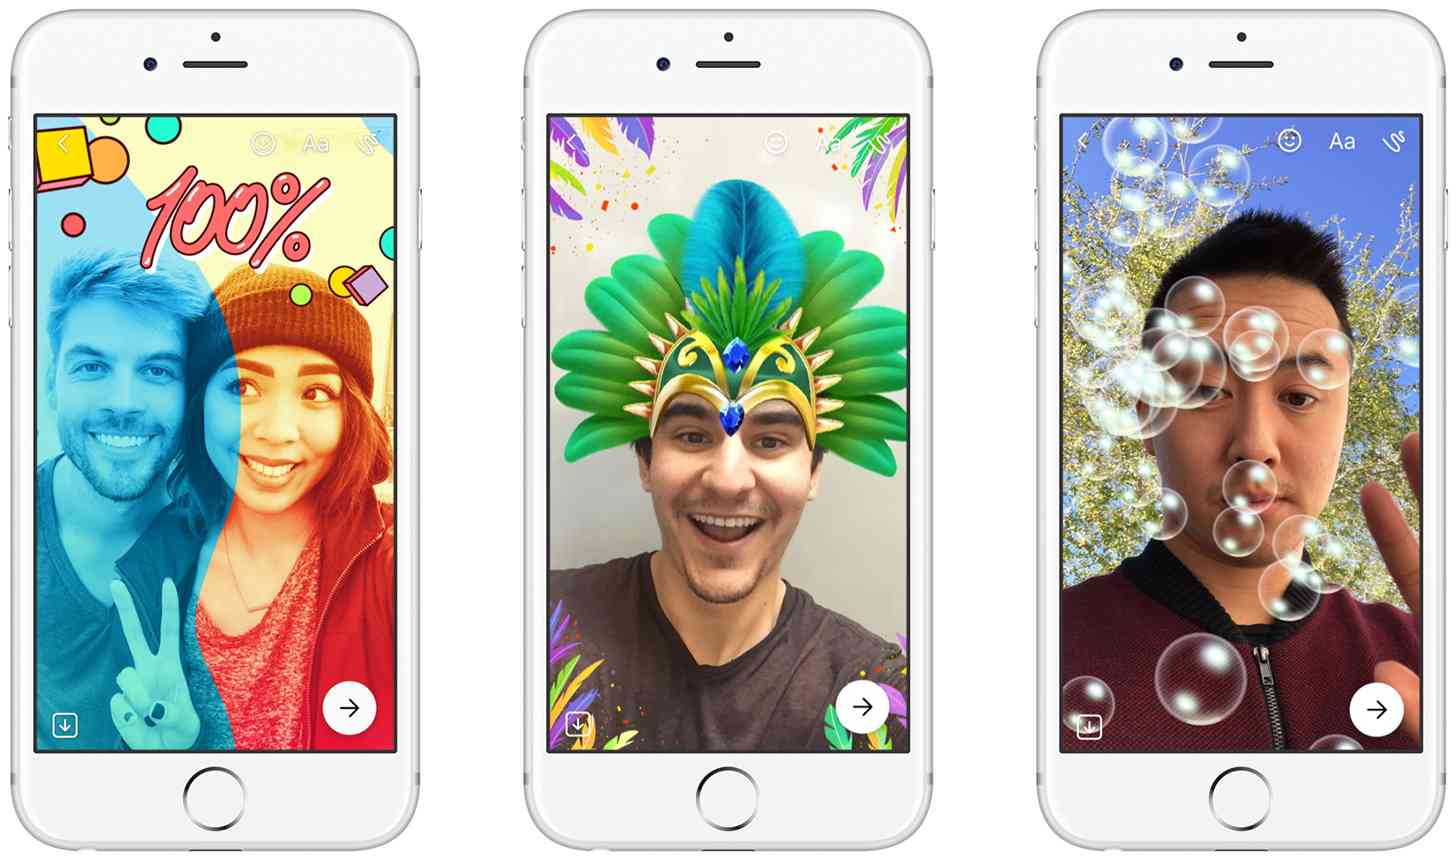 Facebook Messenger Day Snapchat clone official